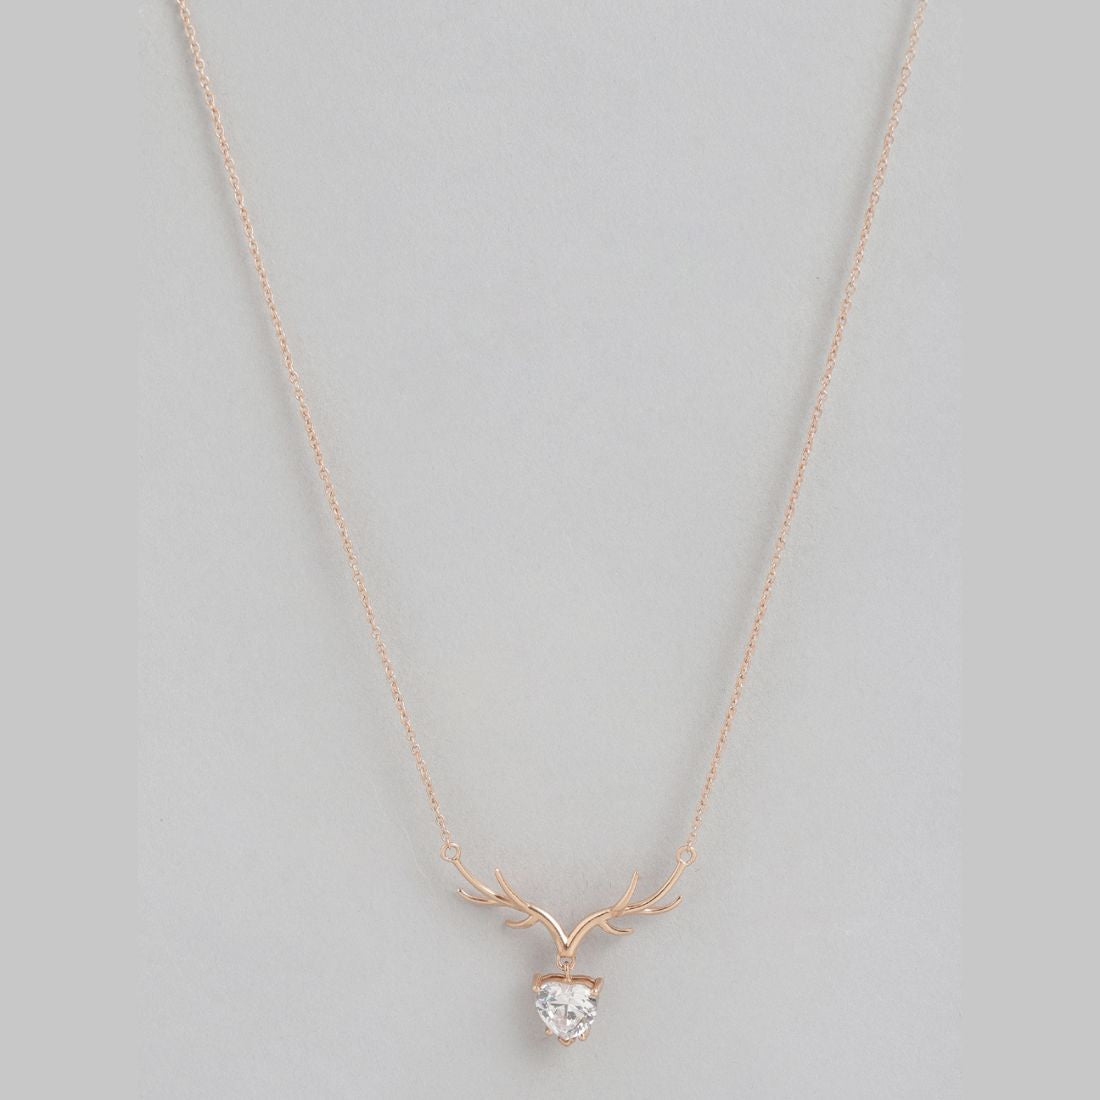 Mystique Deer Rose Gold Plated  925 Sterling Silver Necklace with Cubic Zirconia